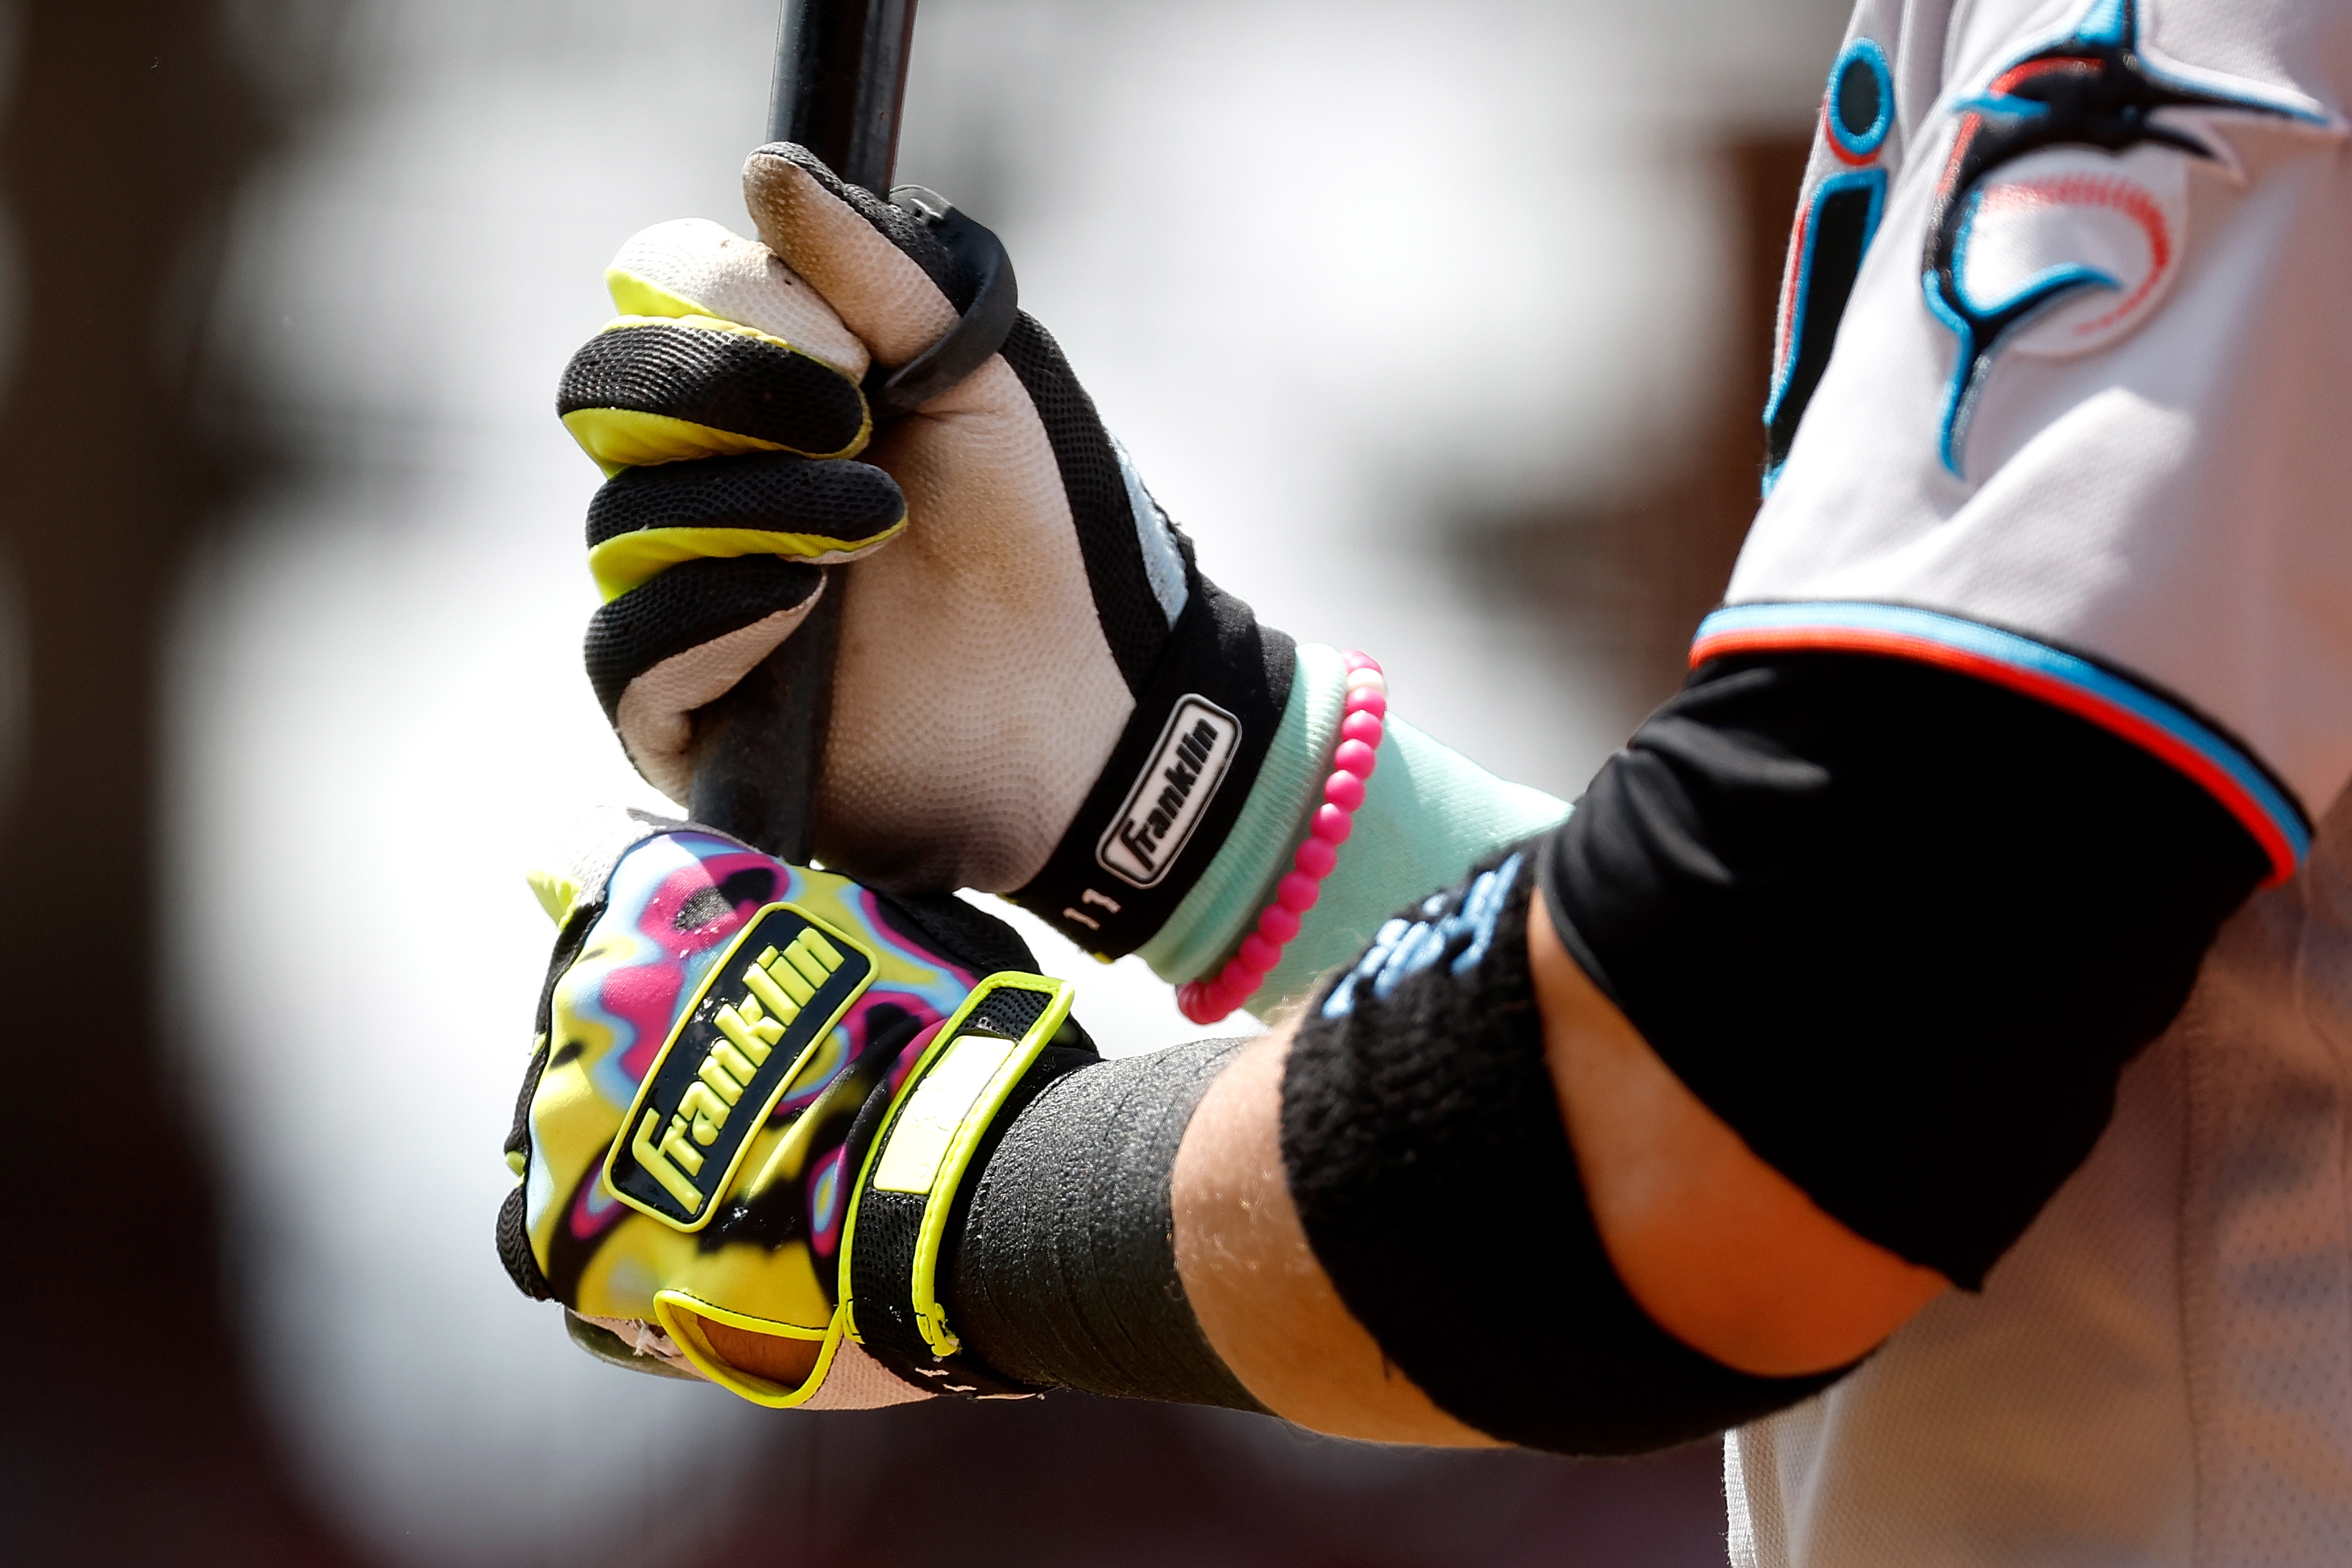 A detail of the Franklin batting gloves worn by Miguel Rojas #11 of the Miami Marlins during the game against the Cincinnati Reds at Great American Ball Park on July 28, 2022 in Cincinnati, Ohio.